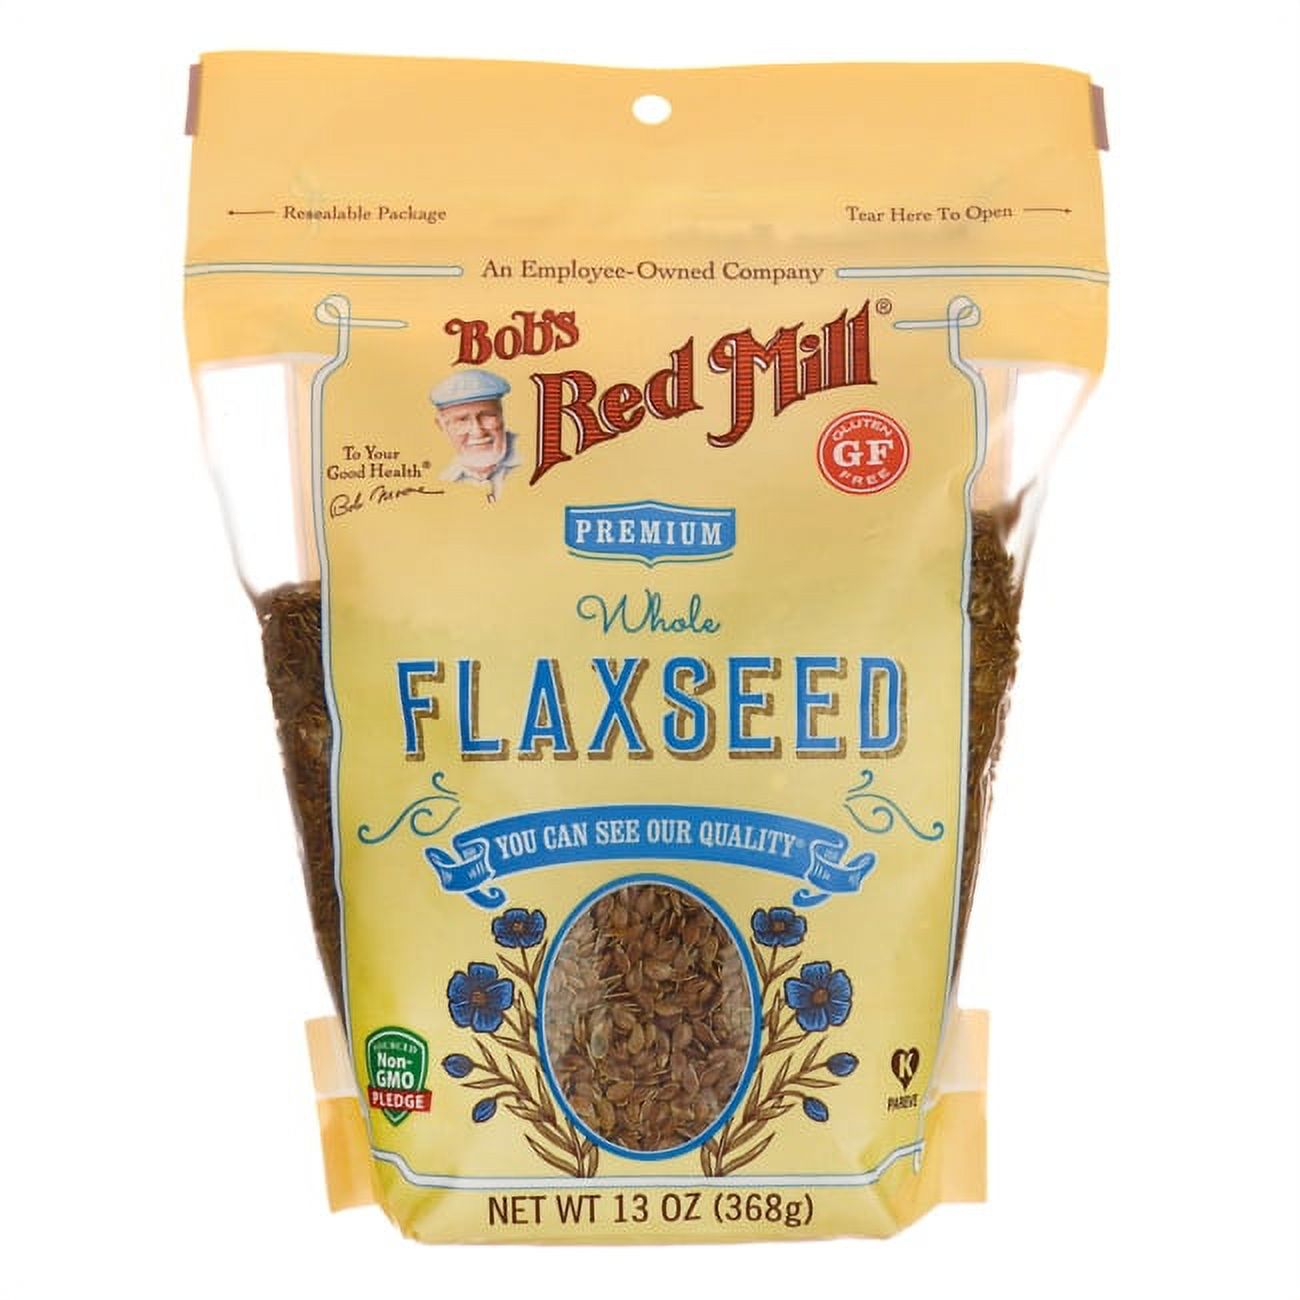 Bob's Red Mill Premium Whole Flaxseed 13 oz Pkg - image 1 of 2